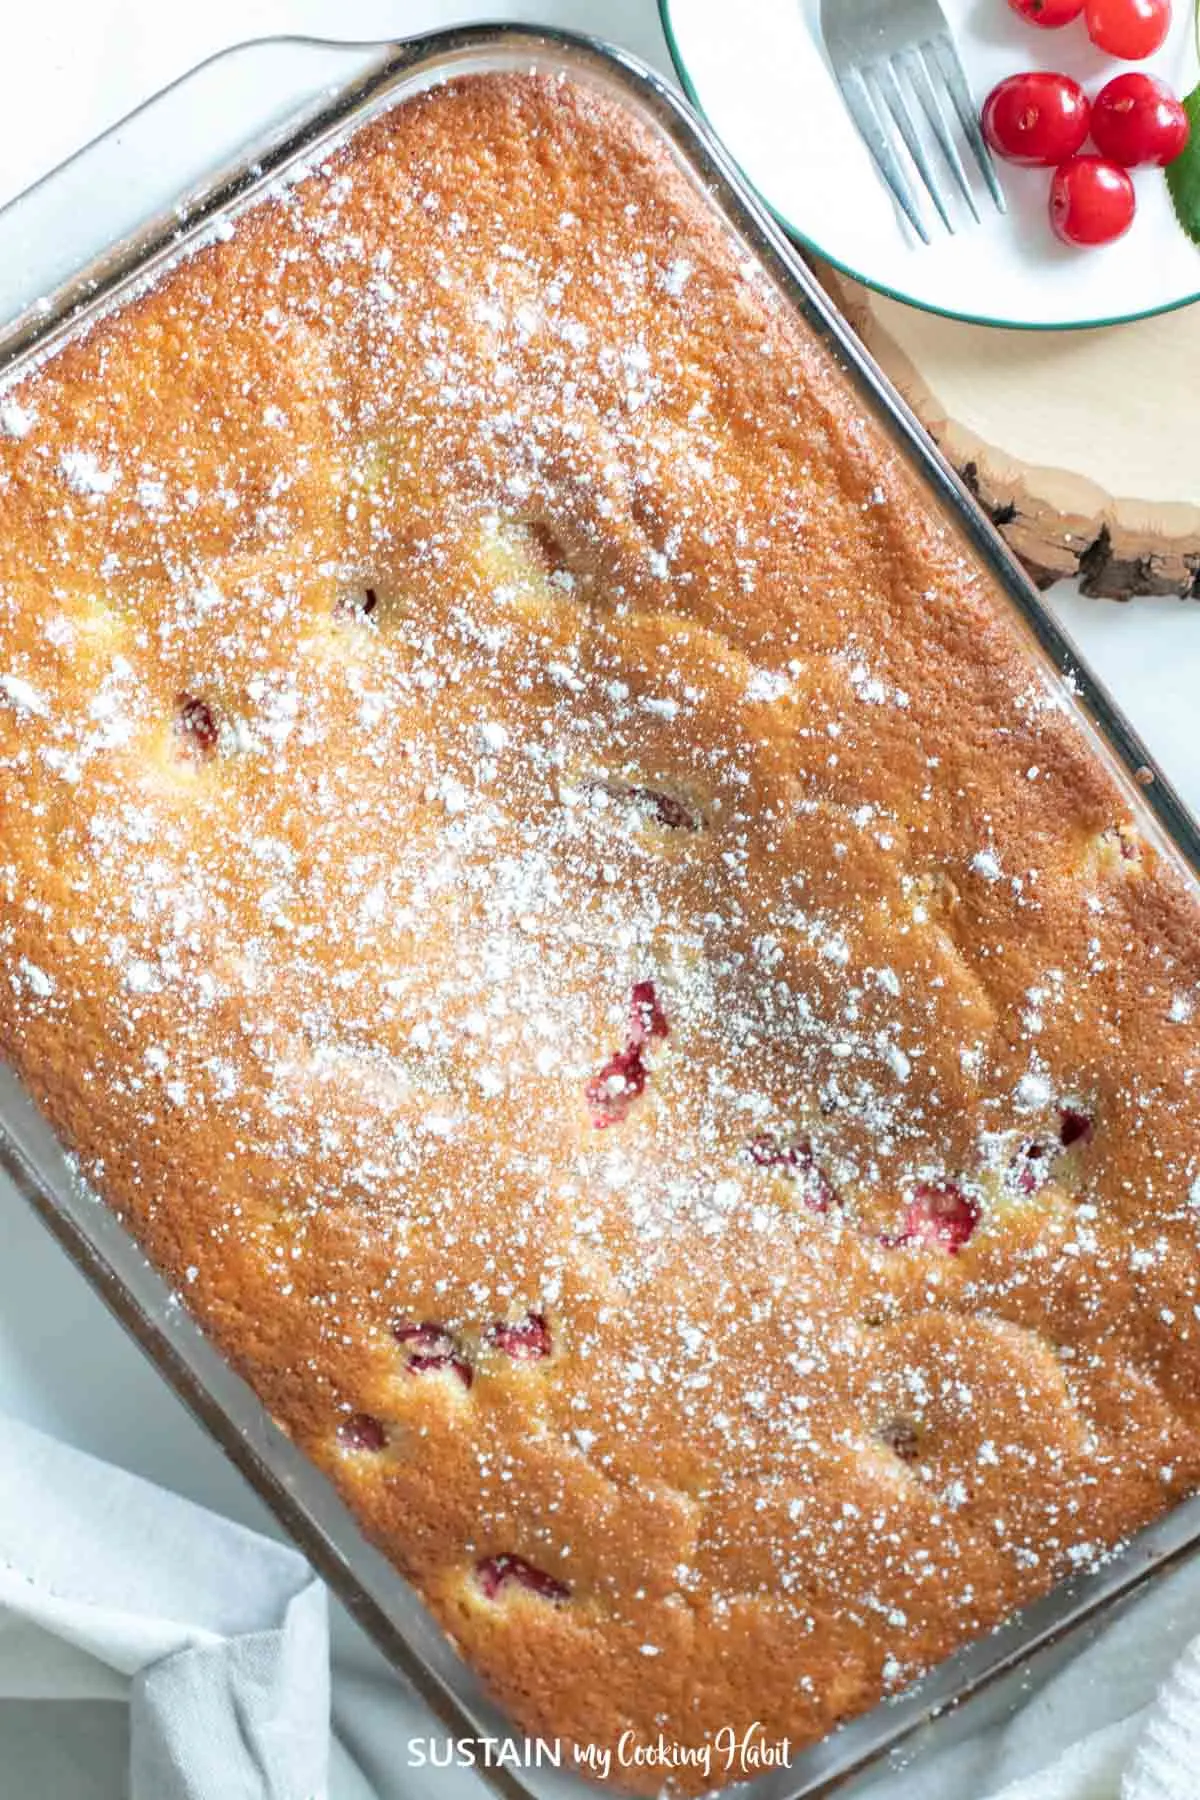 over view image of sour cherry cake with icing sugar